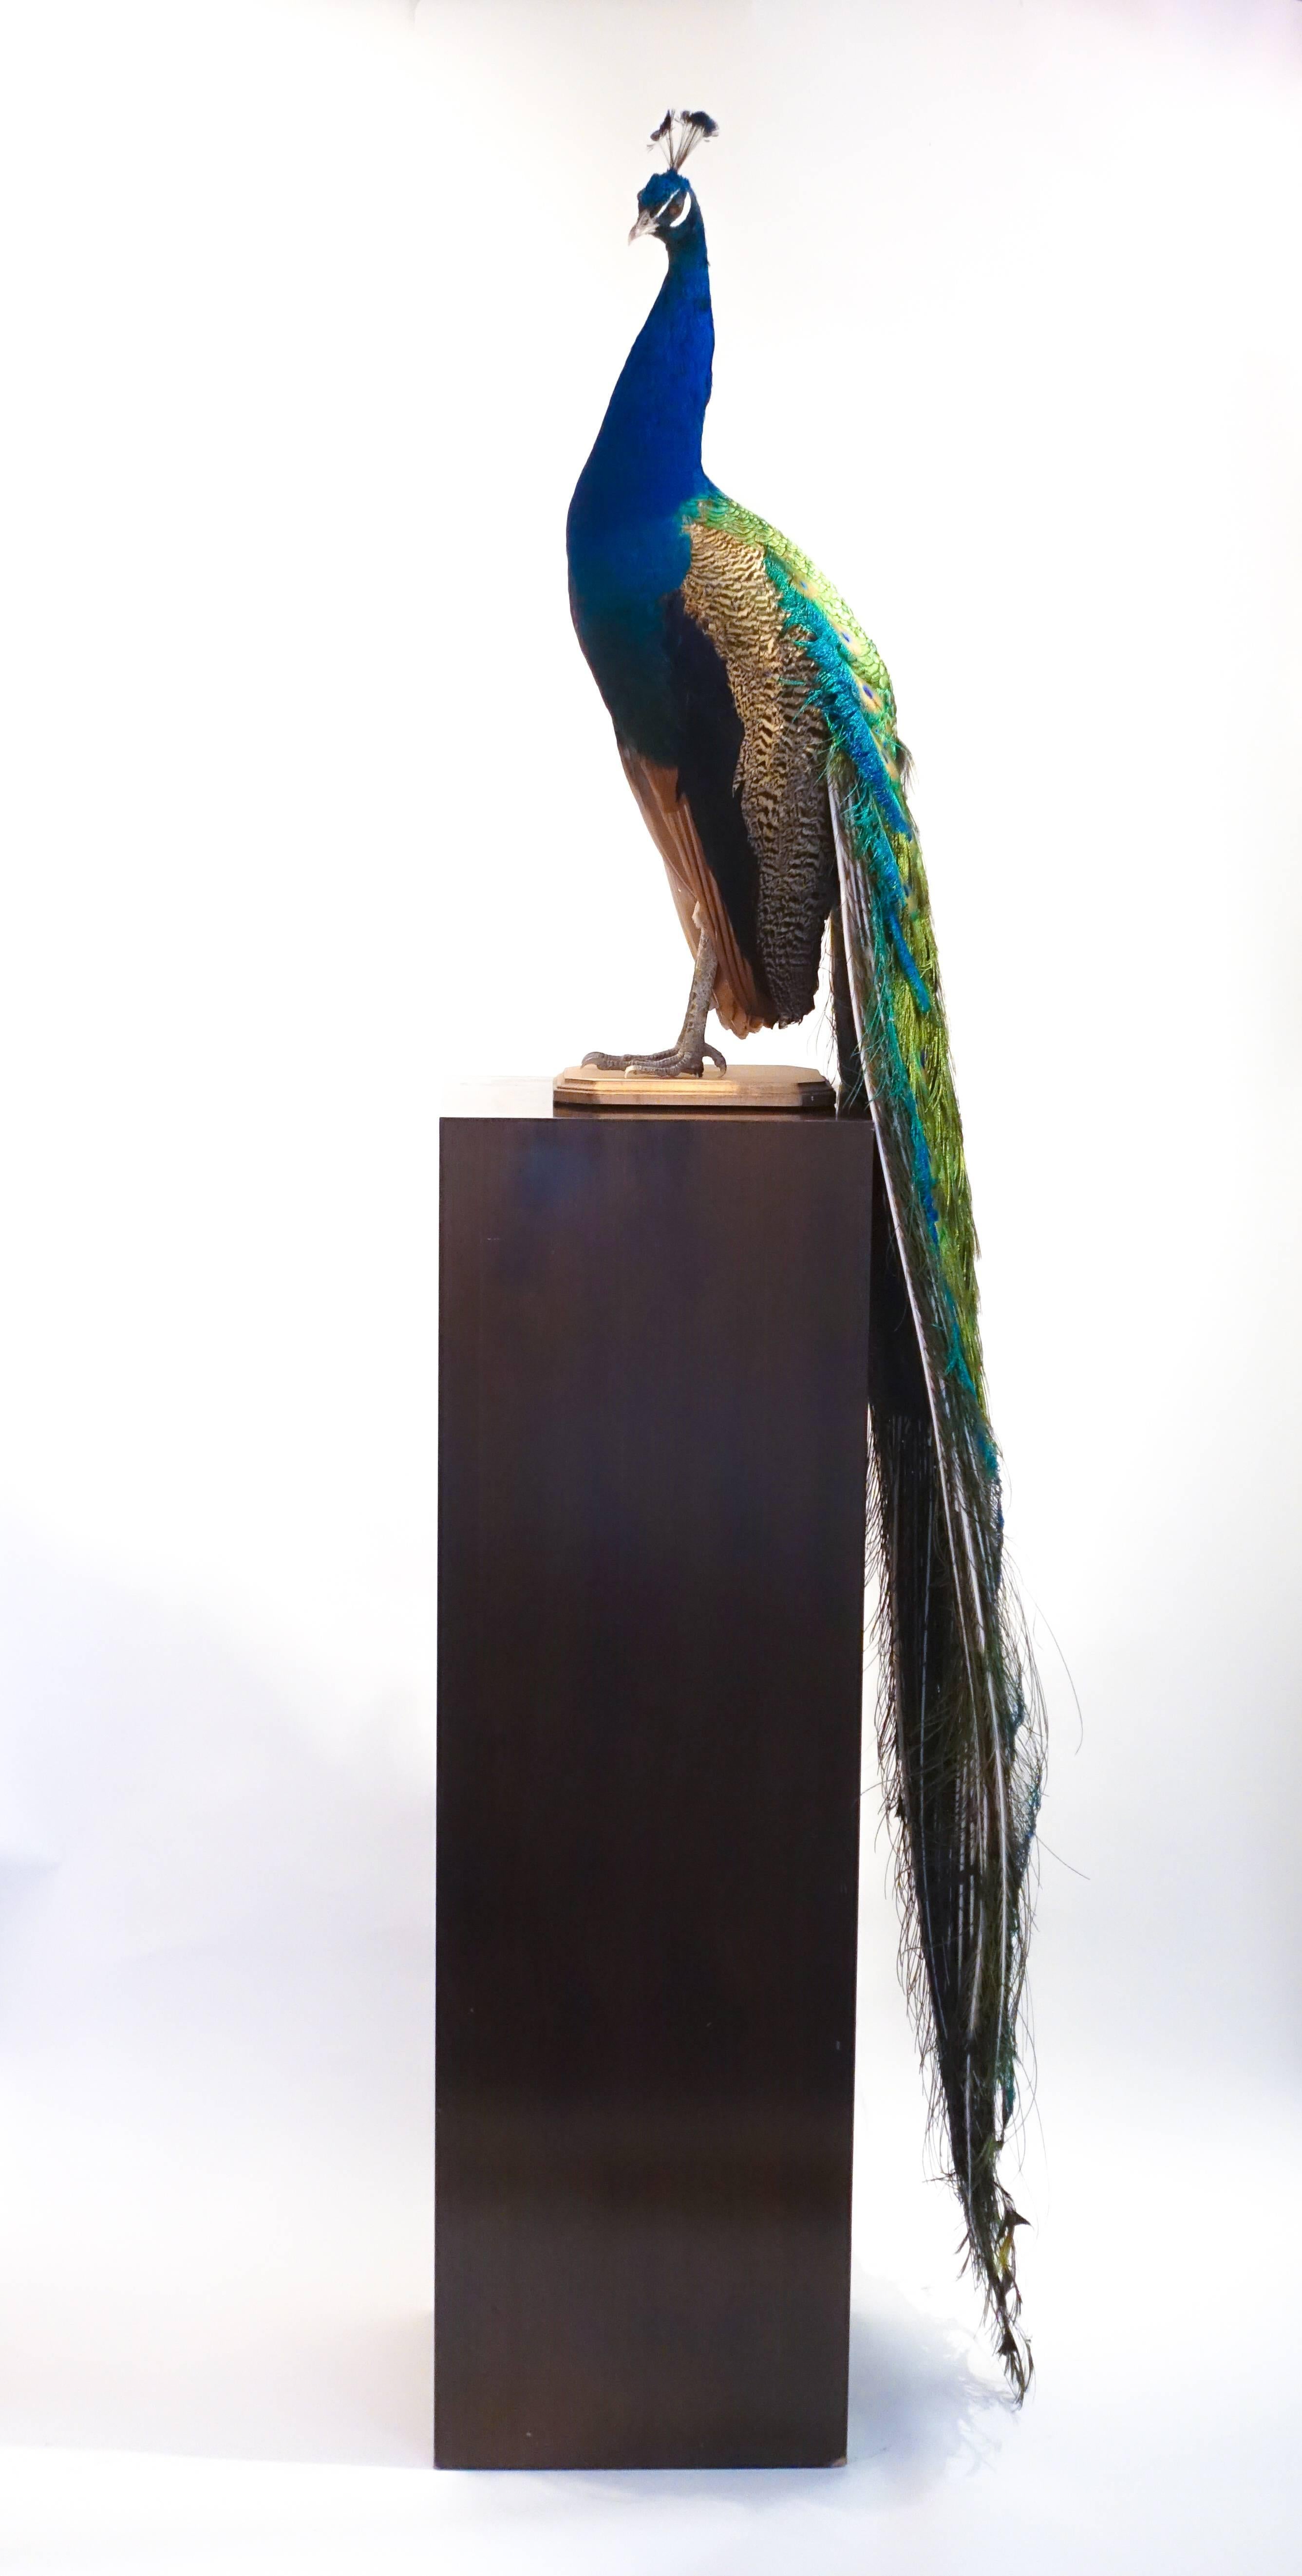 Indian blue peacock taxidermy mount with beautiful iridescent blue and green coloration. It is mounted on an oval wooden base and can be displayed by placement on a wall bracket, mantelpiece or stand. There are many possible display options as the